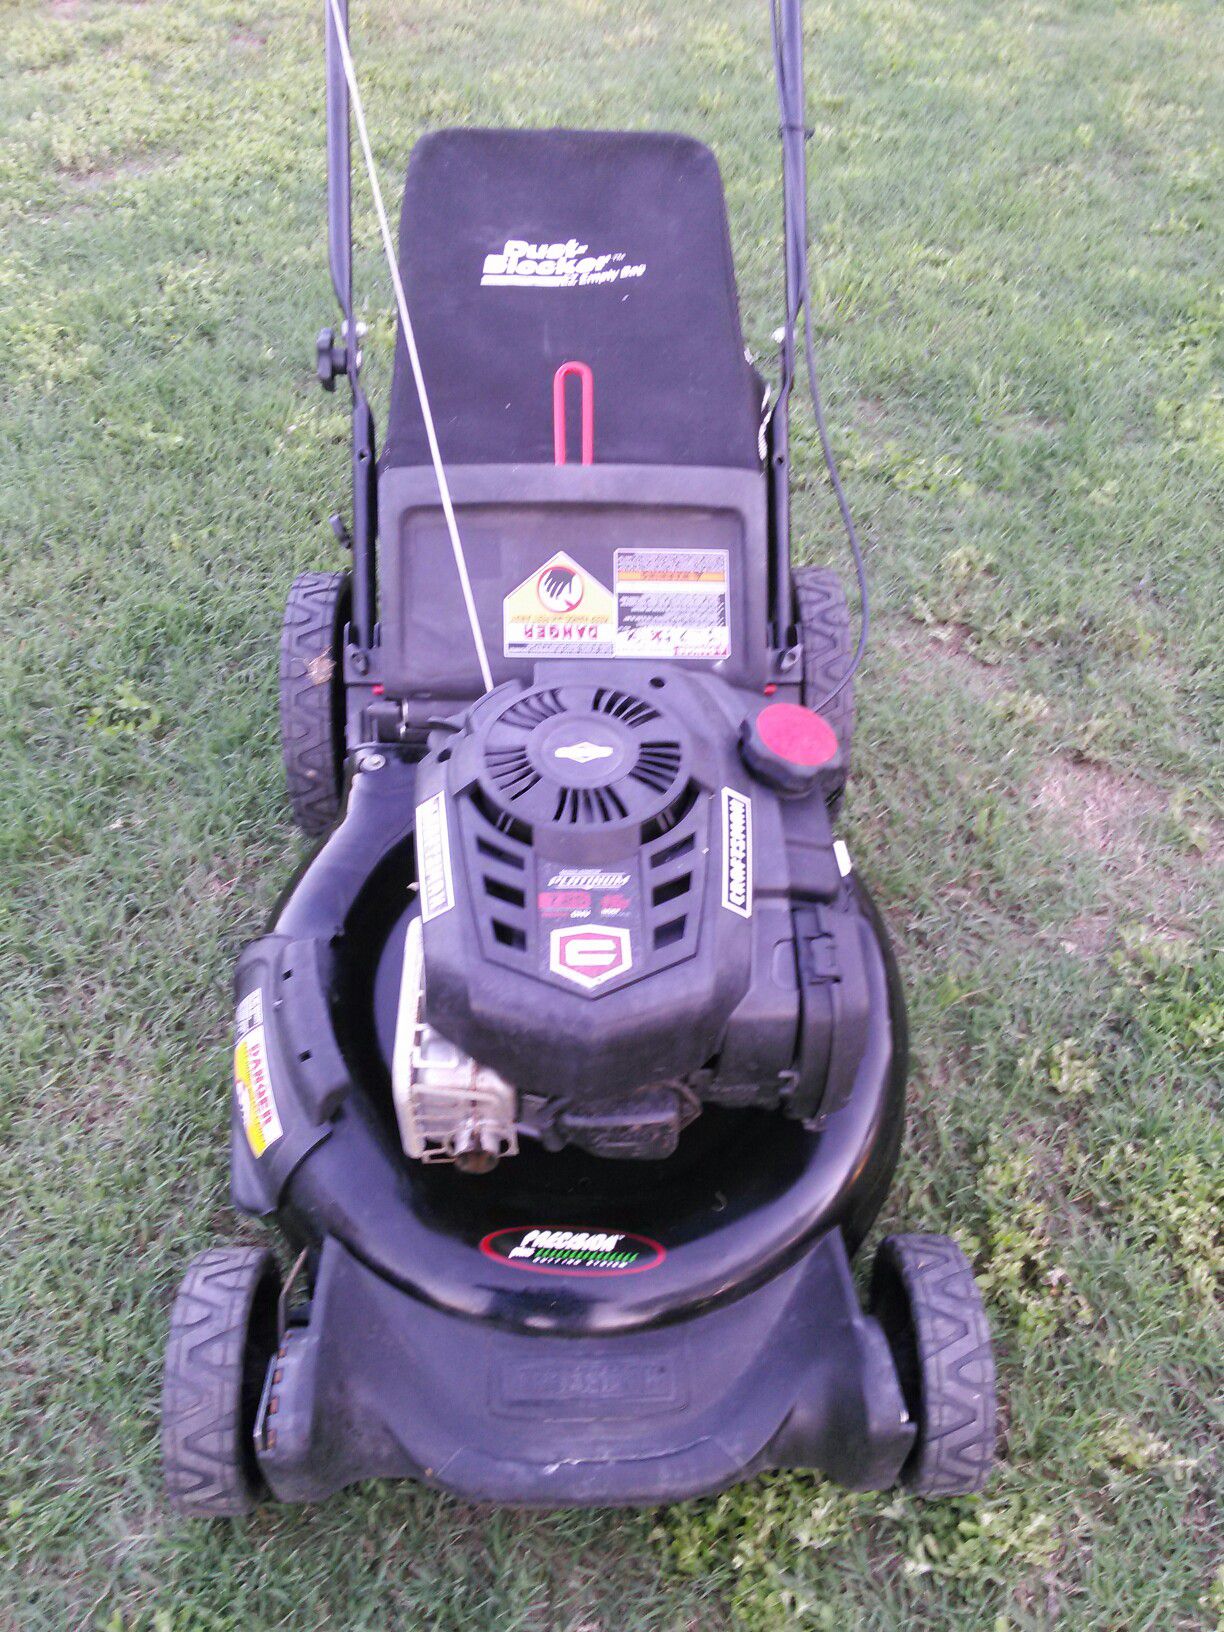 Very strong engine Craftsman 7.25 horsepower push lawn mower works absolutely great guaranteed to turn on on first pull